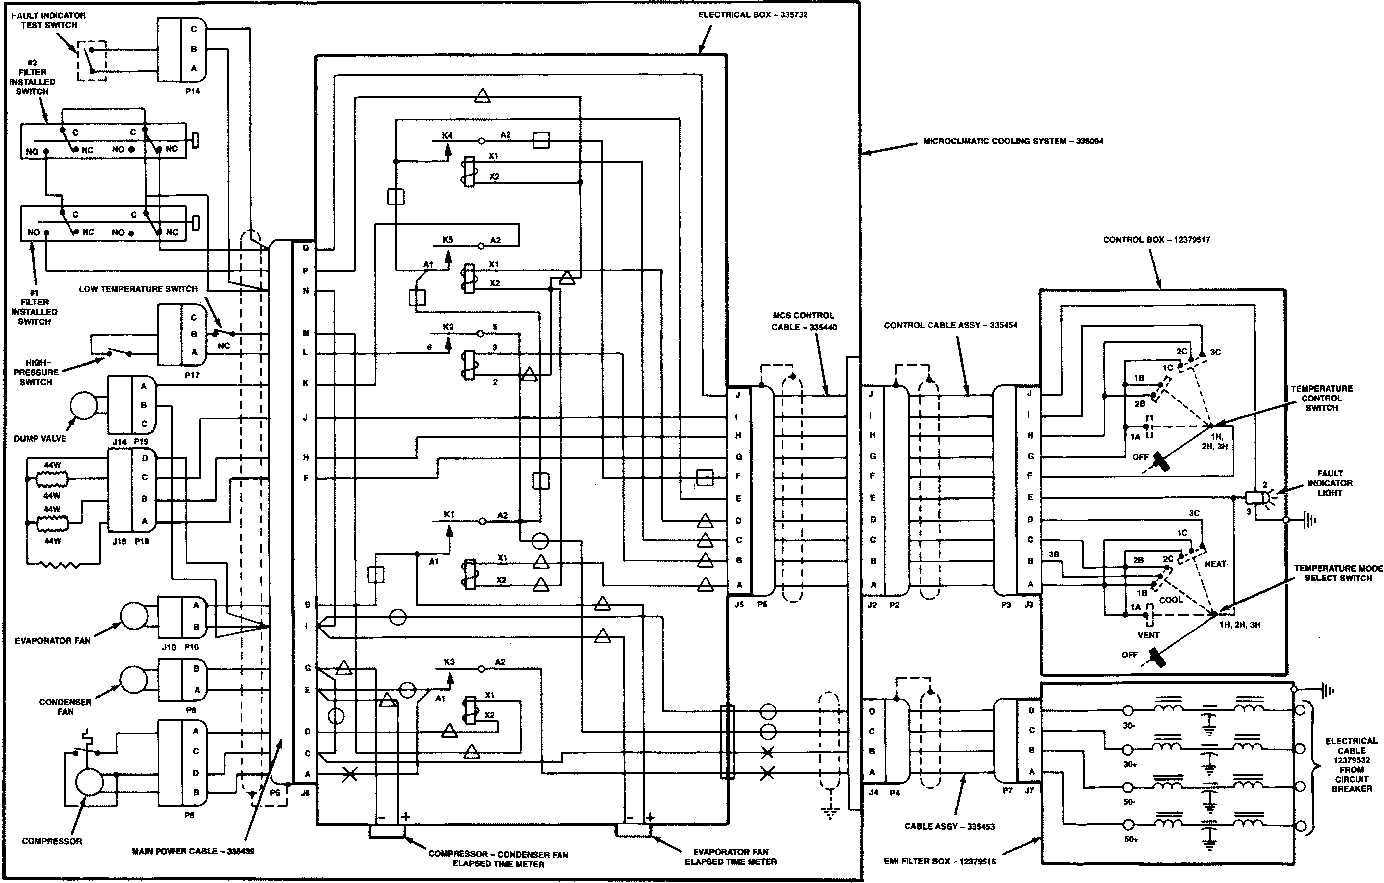 Dohc Oil Diagram In Addition Electrical Engineering Schematics Further Mge Wiring Diagram Furthermore Kazuma